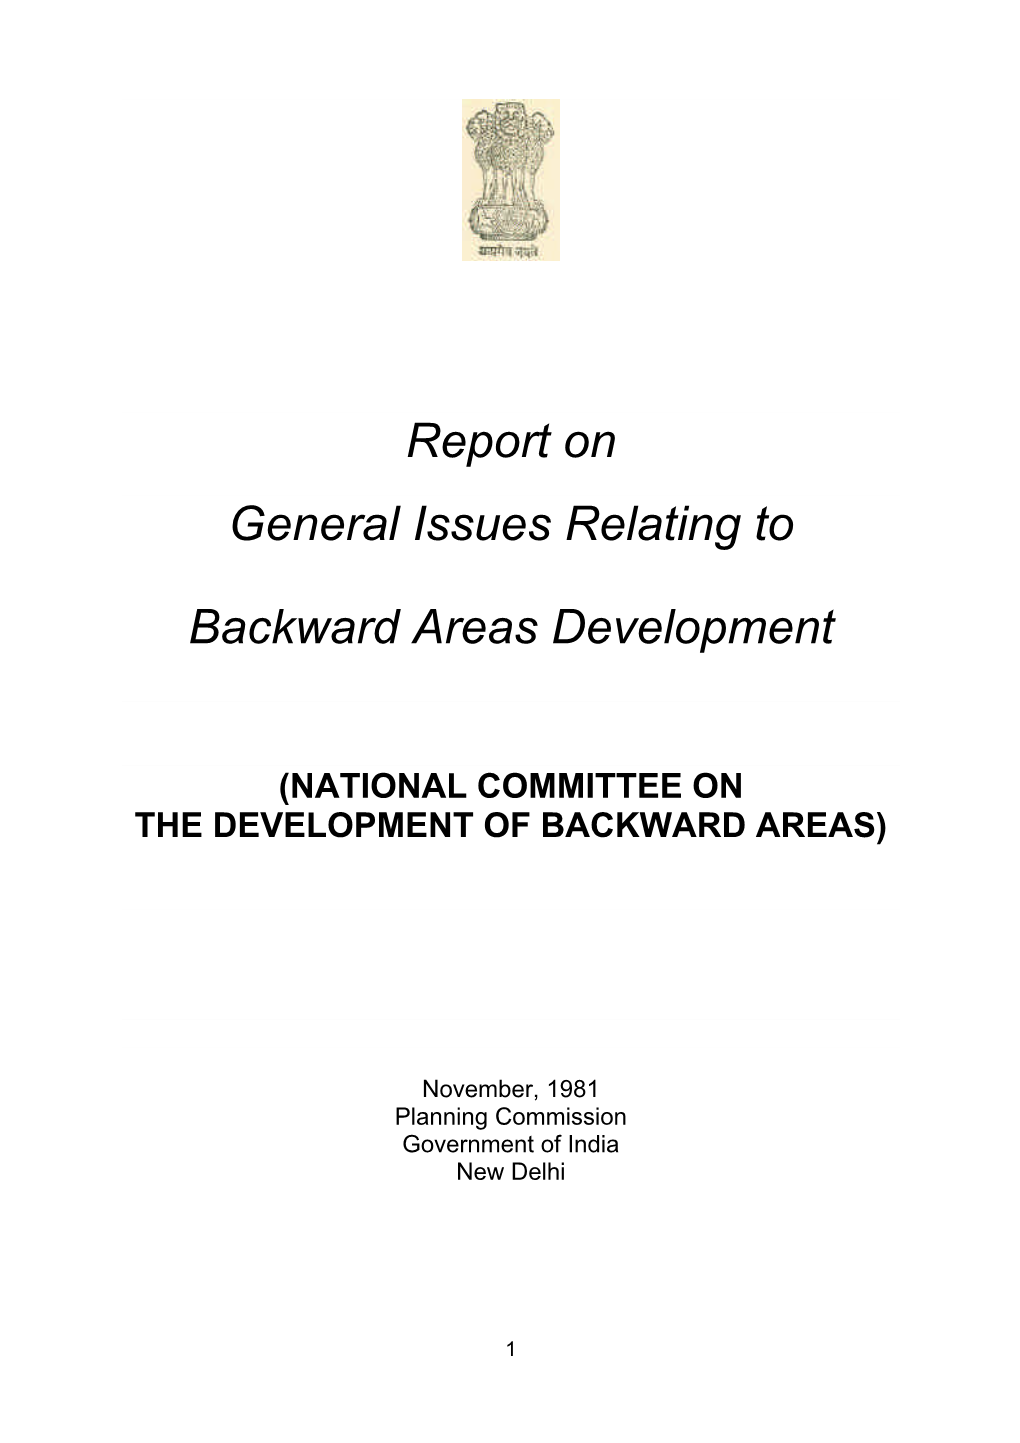 Report on General Issues Relating to Backward Areas Development